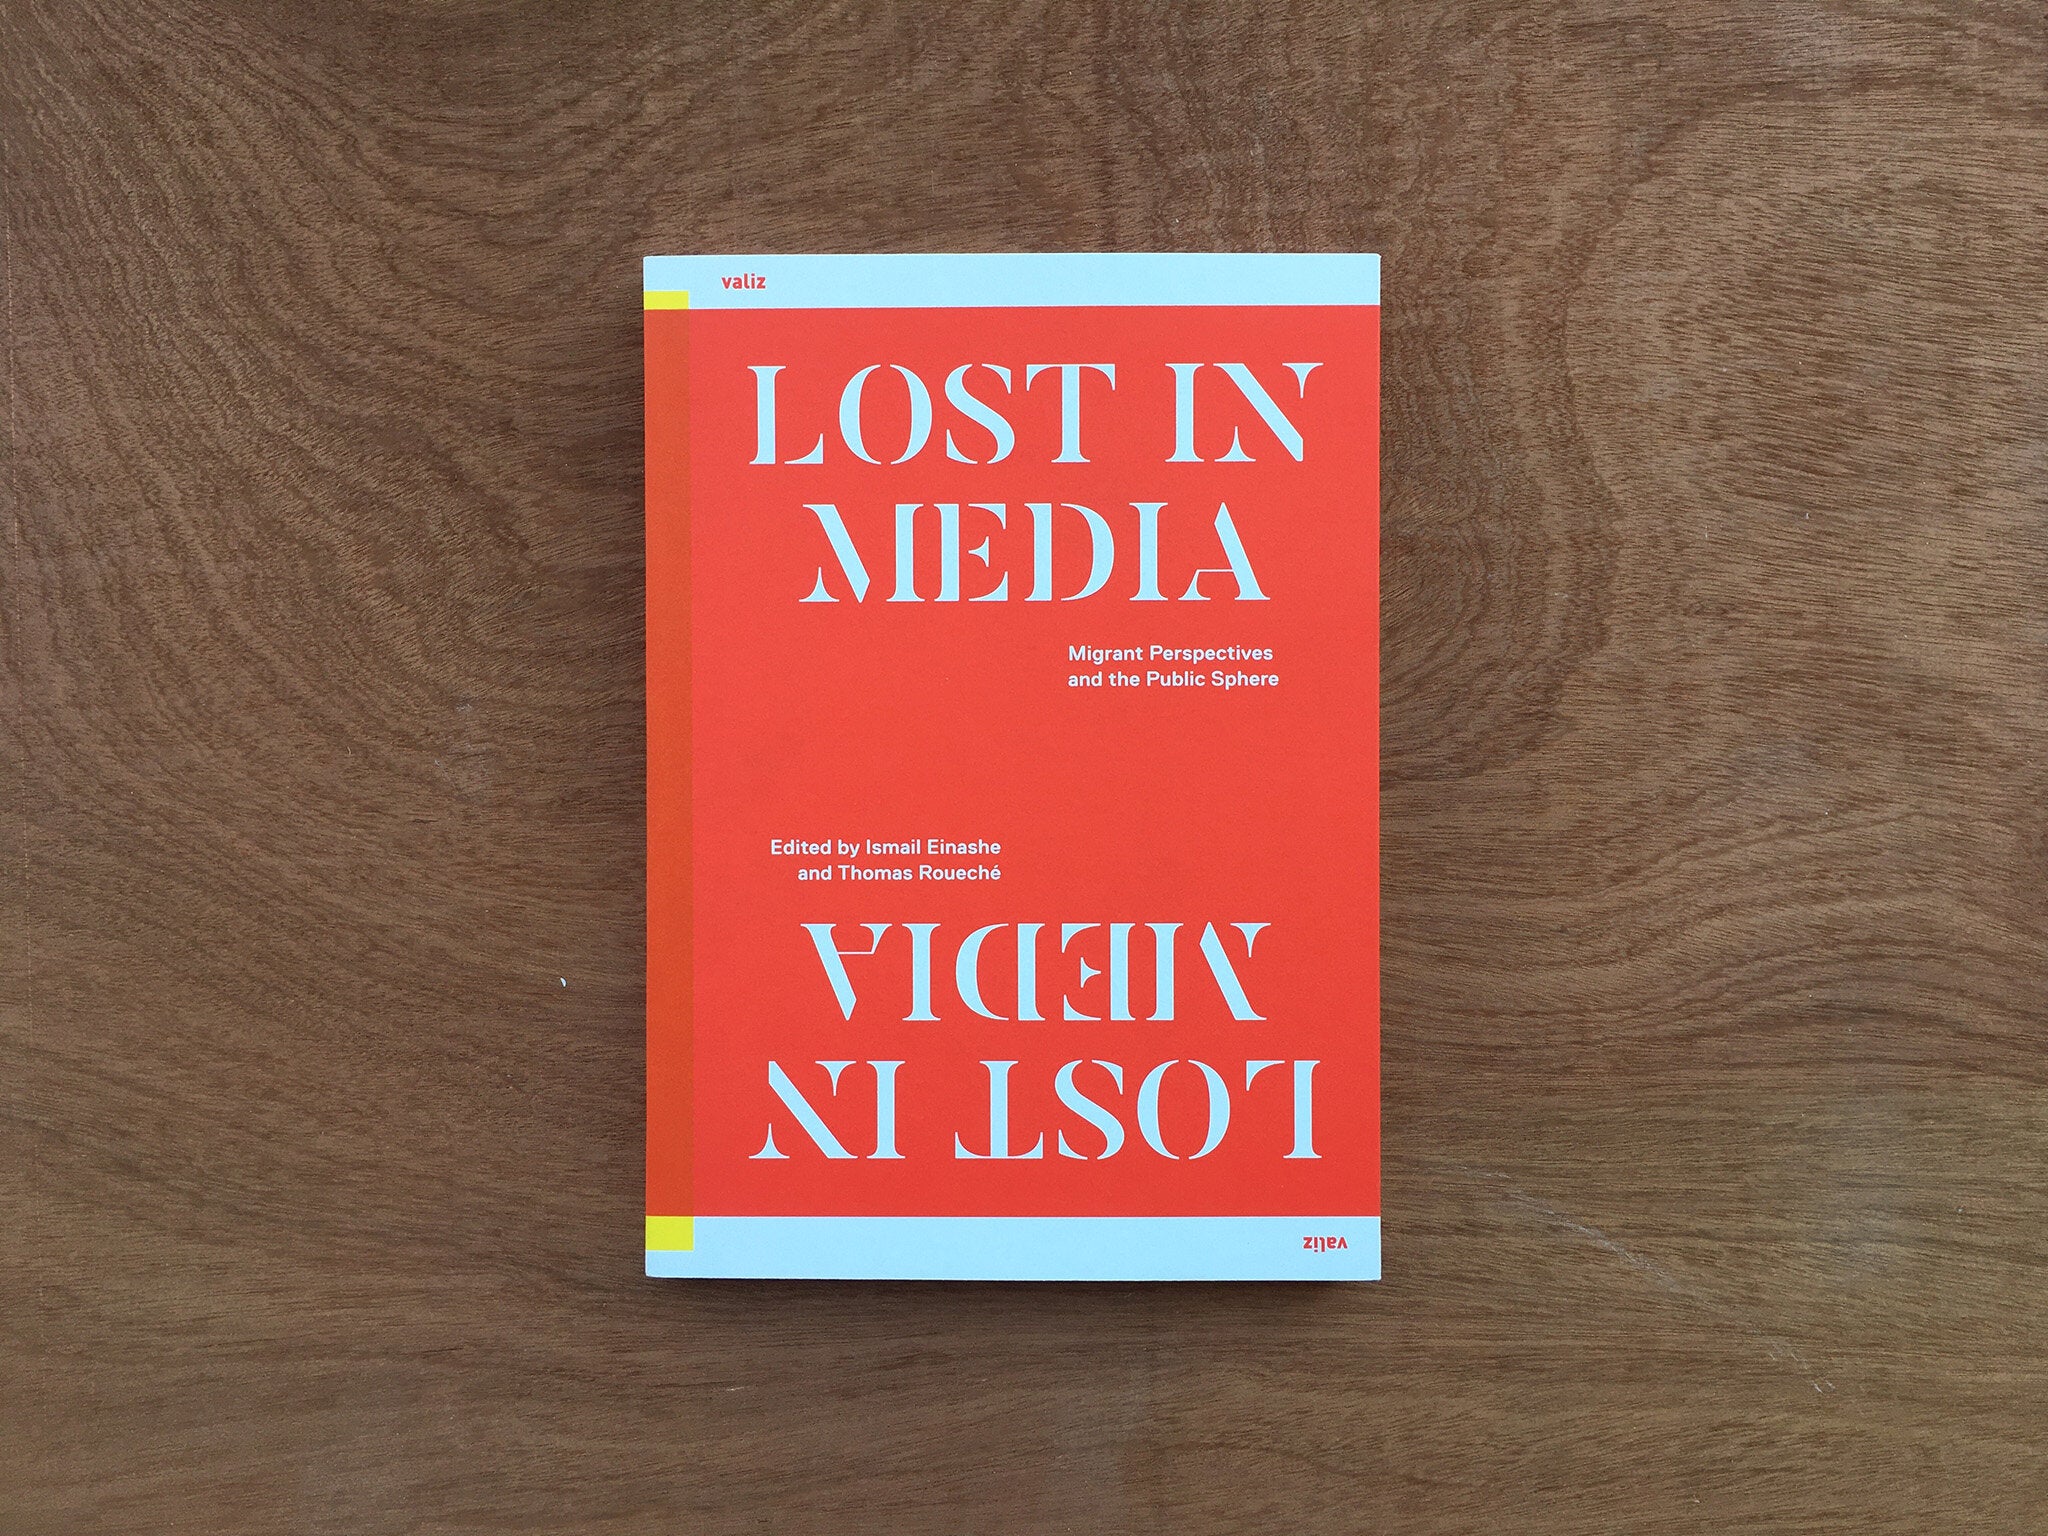 LOST IN MEDIA: MIGRANT PERSPECTIVES AND THE PUBLIC SPHERE by Ismail Einashe and Thomas Roueché